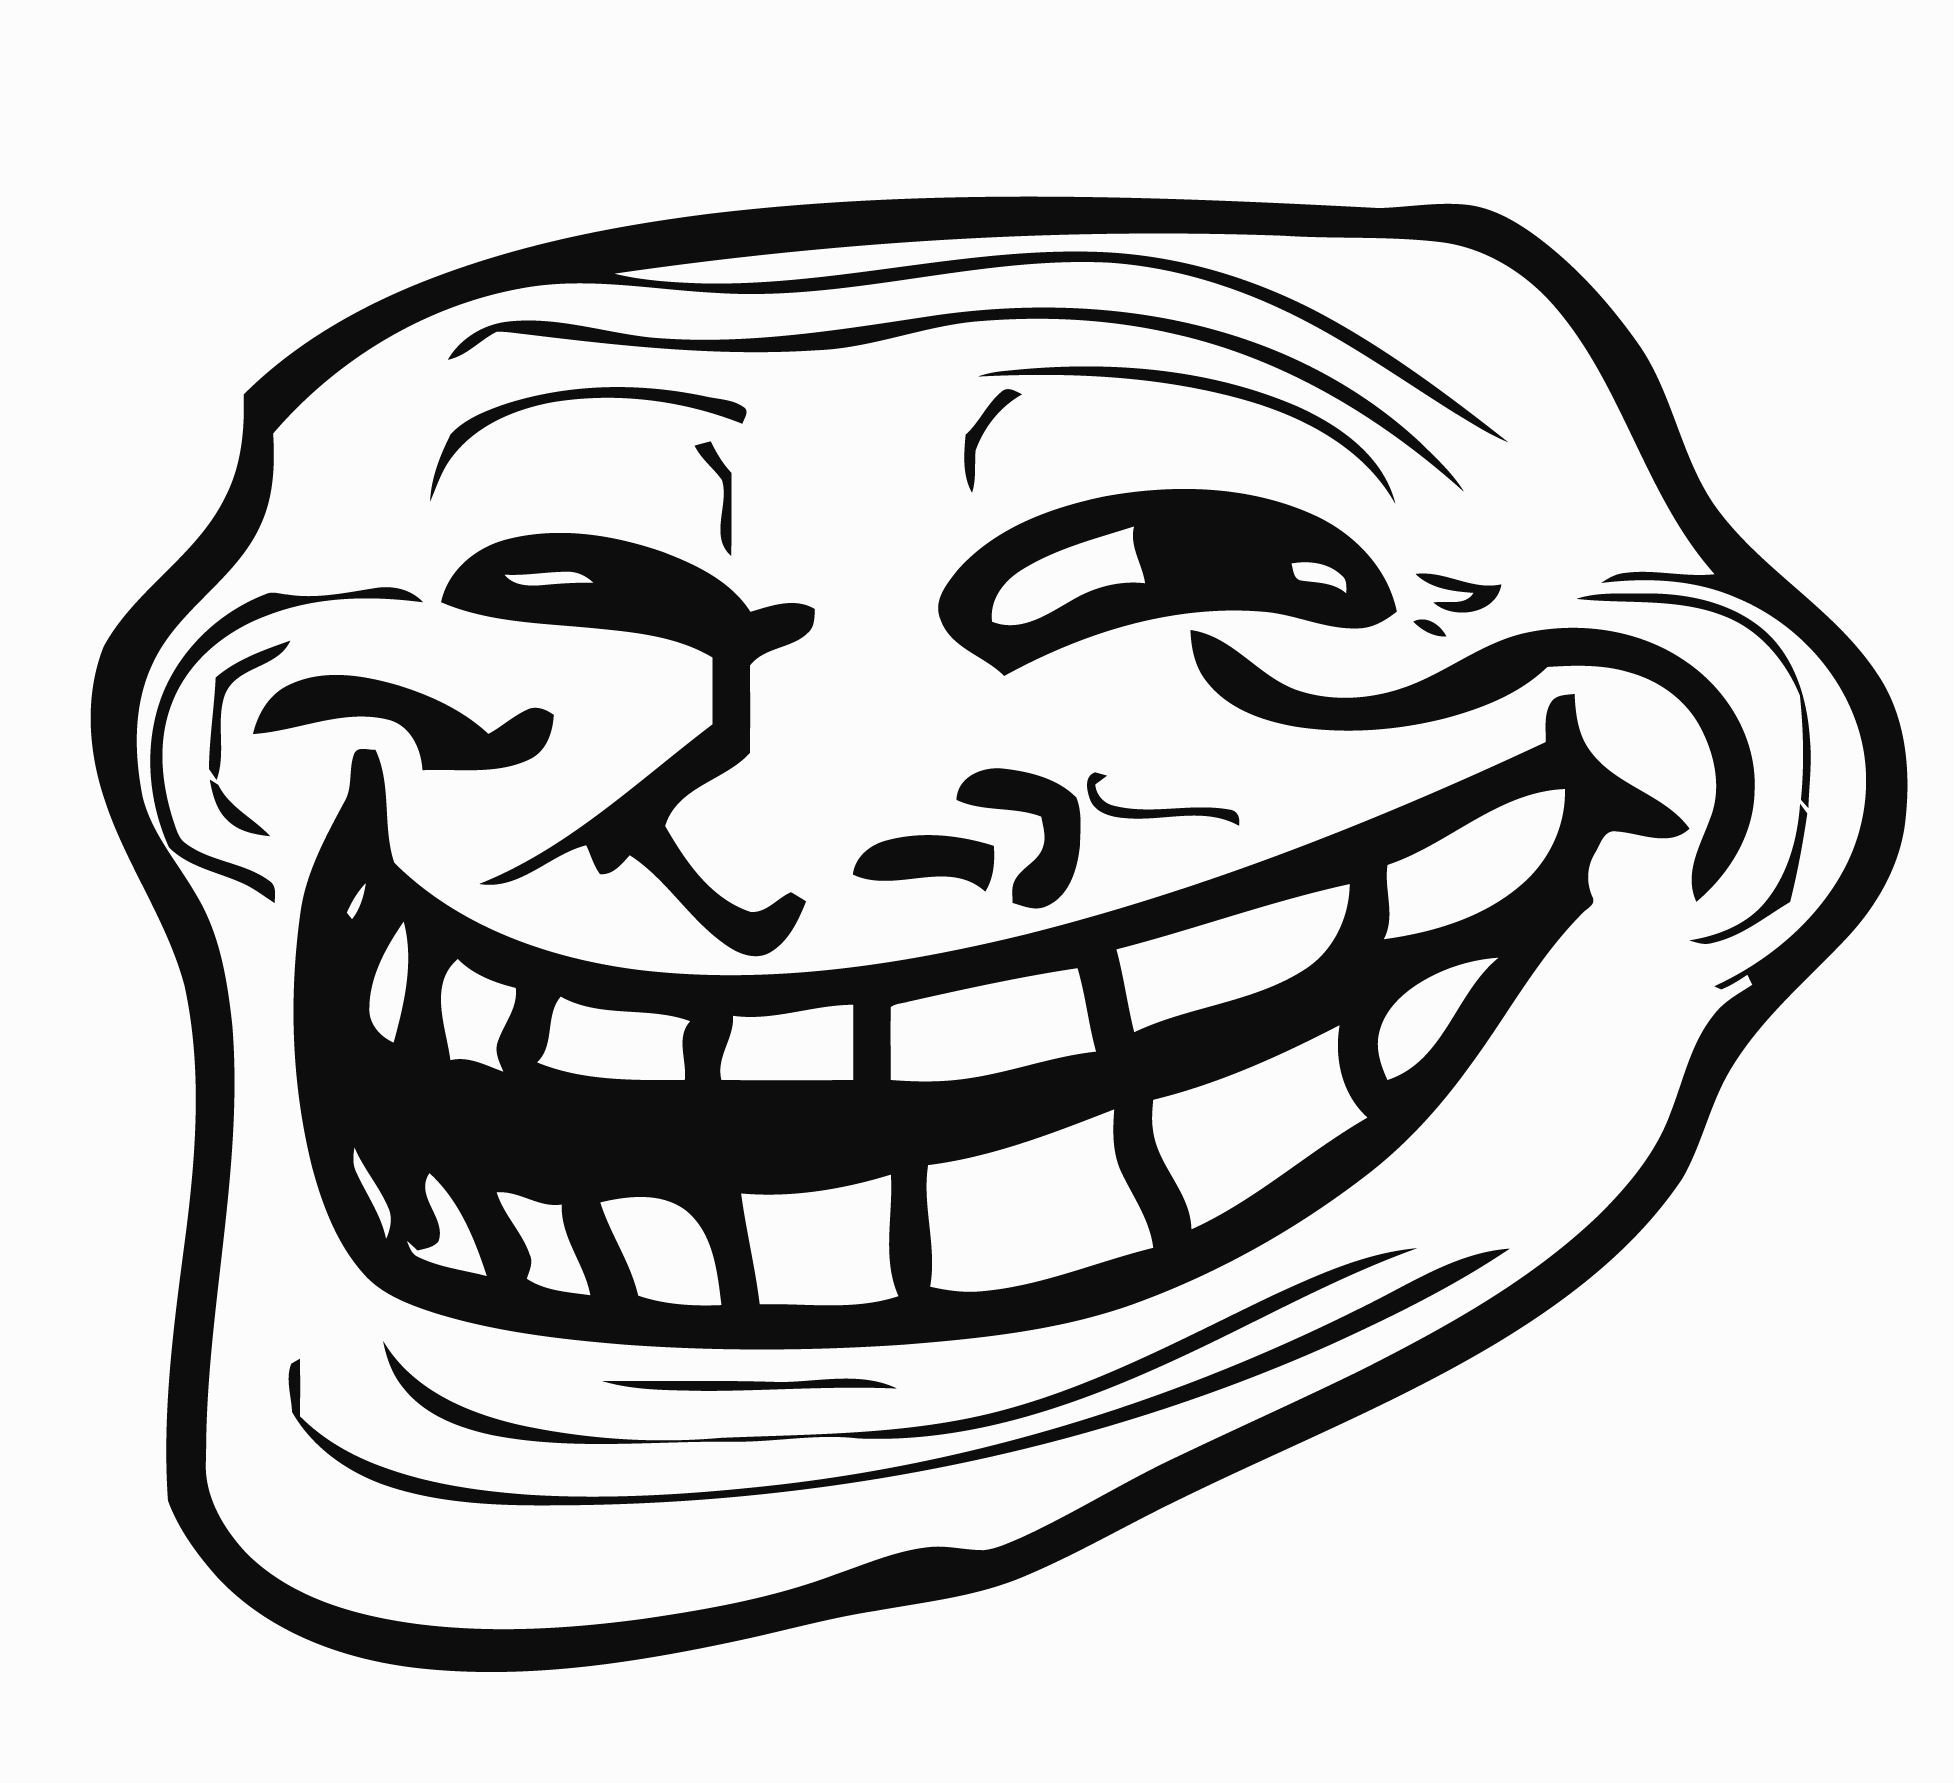 personal_trollface_hd.png